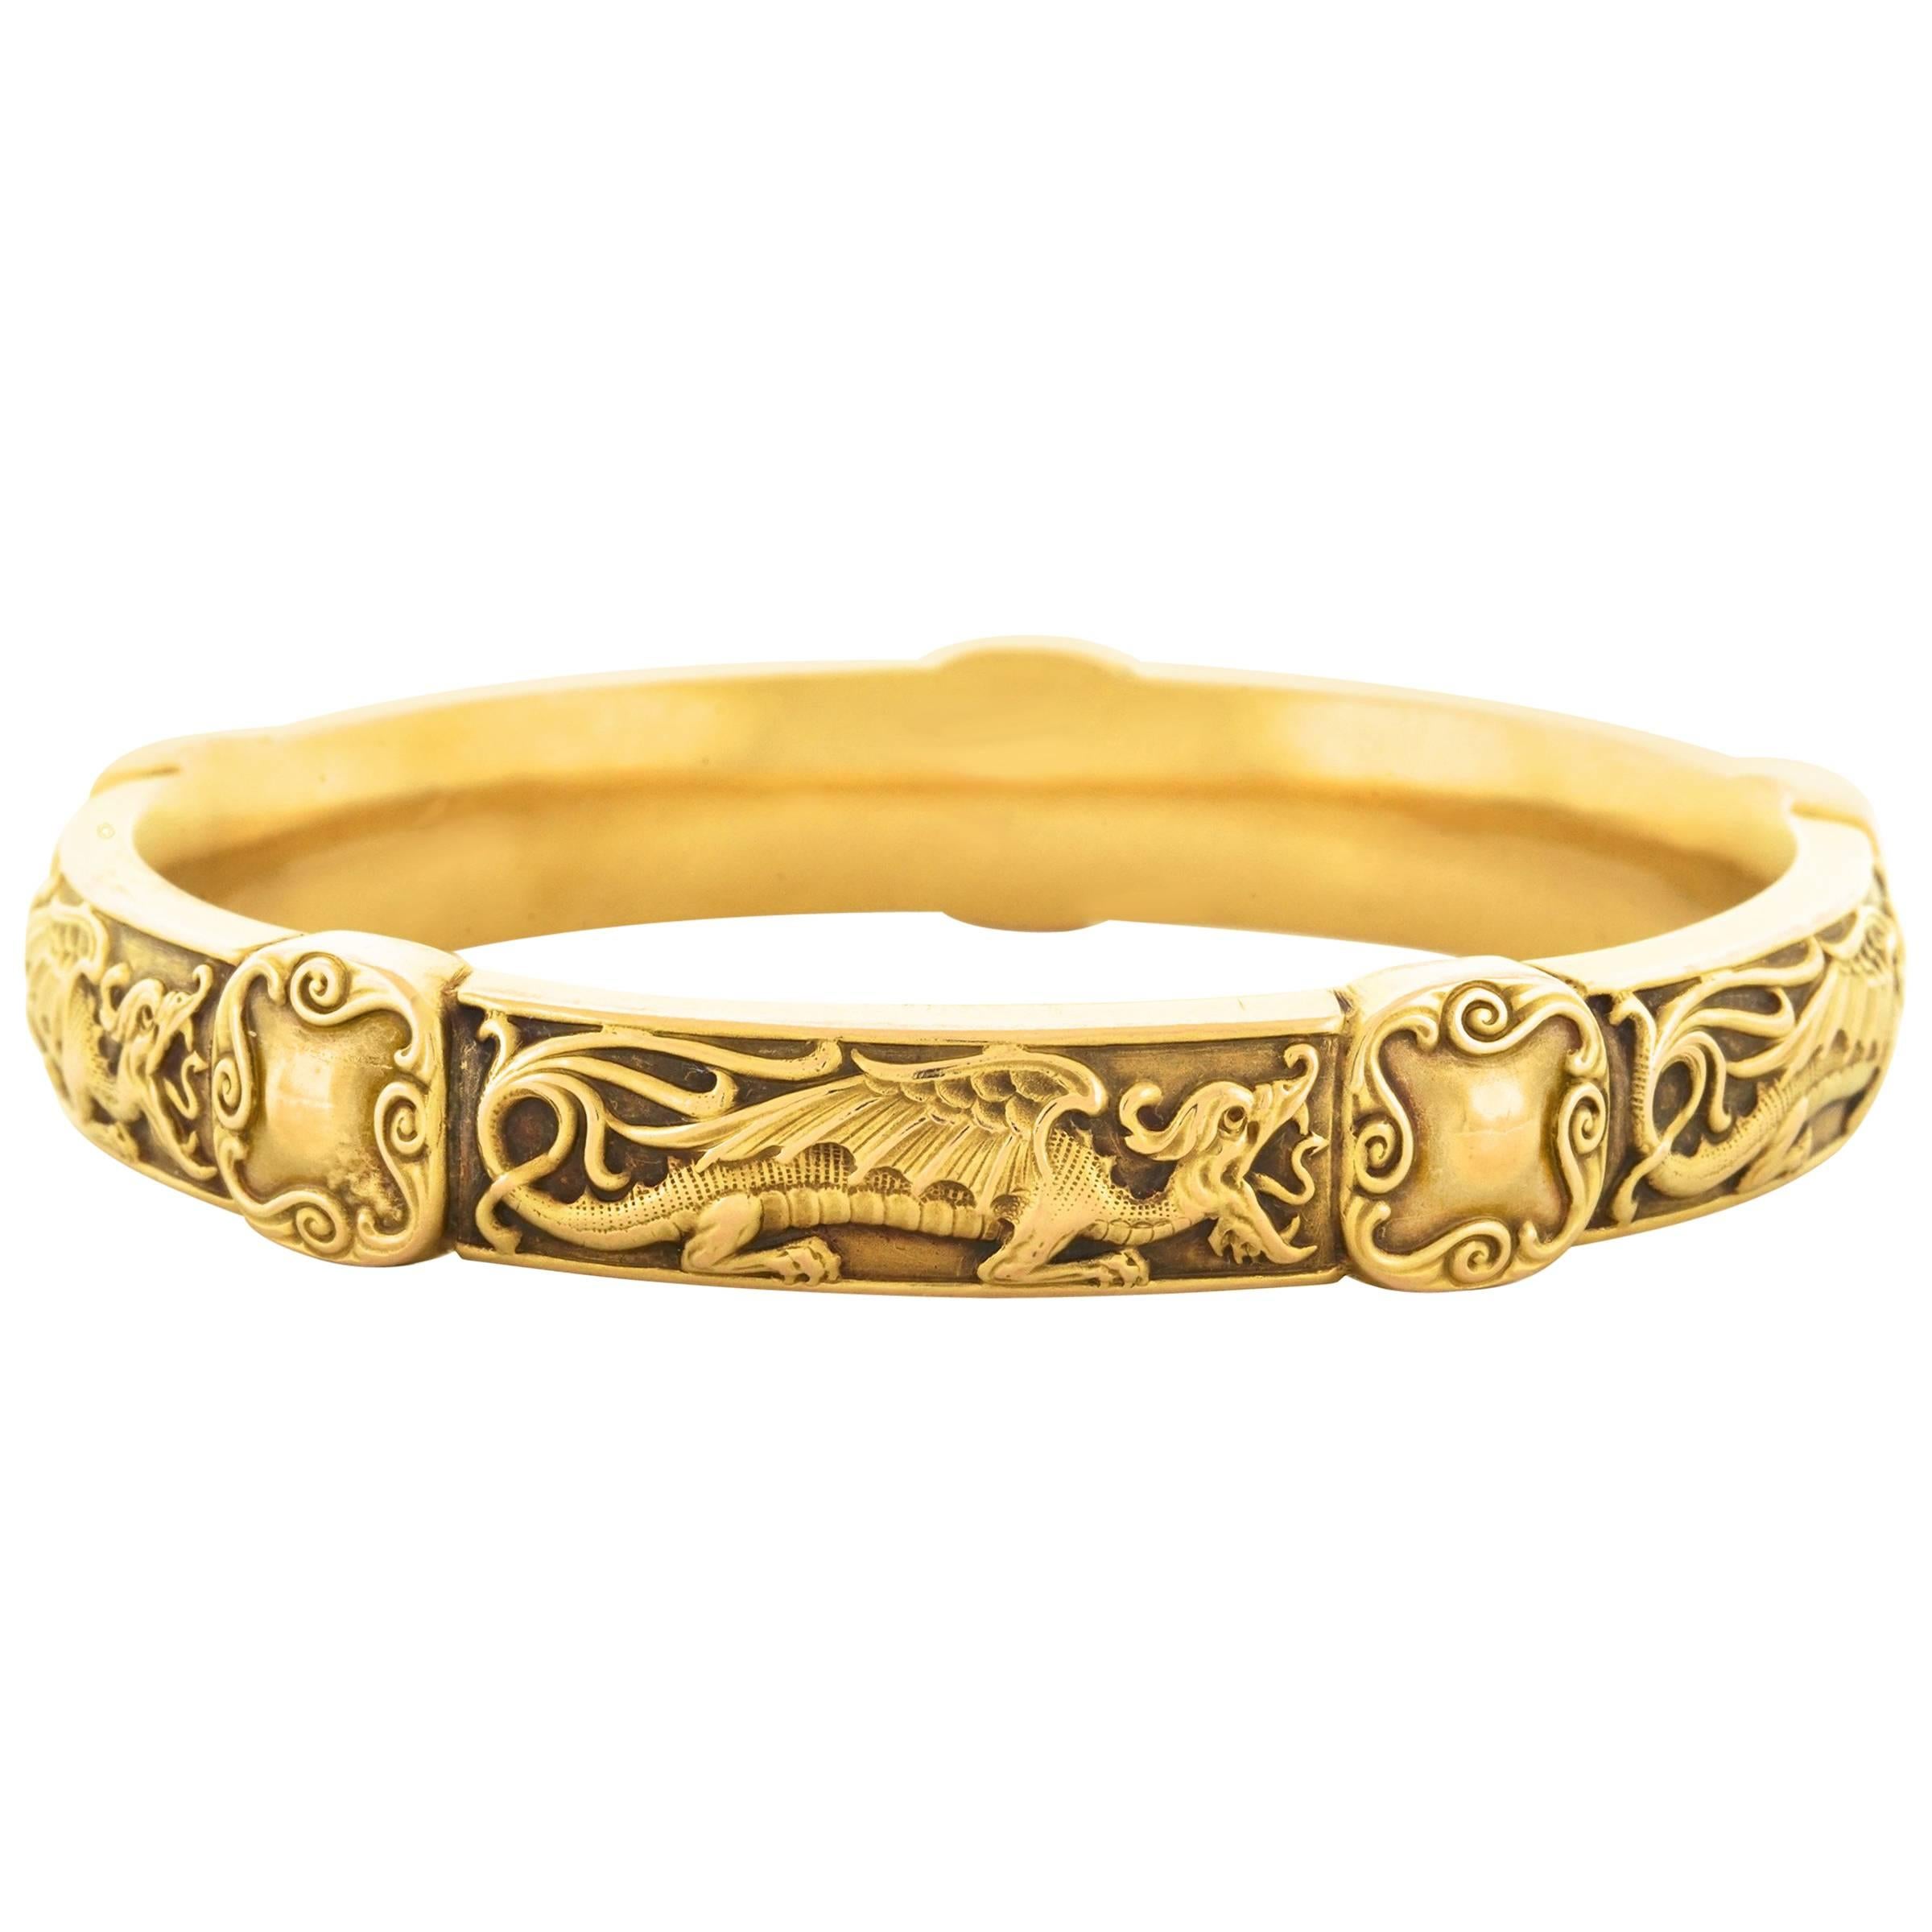 Circa 1890s, 14k and 18k, by Riker Brothers, American.  This stunning pair of Art Nouveau bangles in the Japanese taste by Riker Brothers features a detailed dragon motif and a rare diamond-set Imperial chrysanthemum design. Delightfully